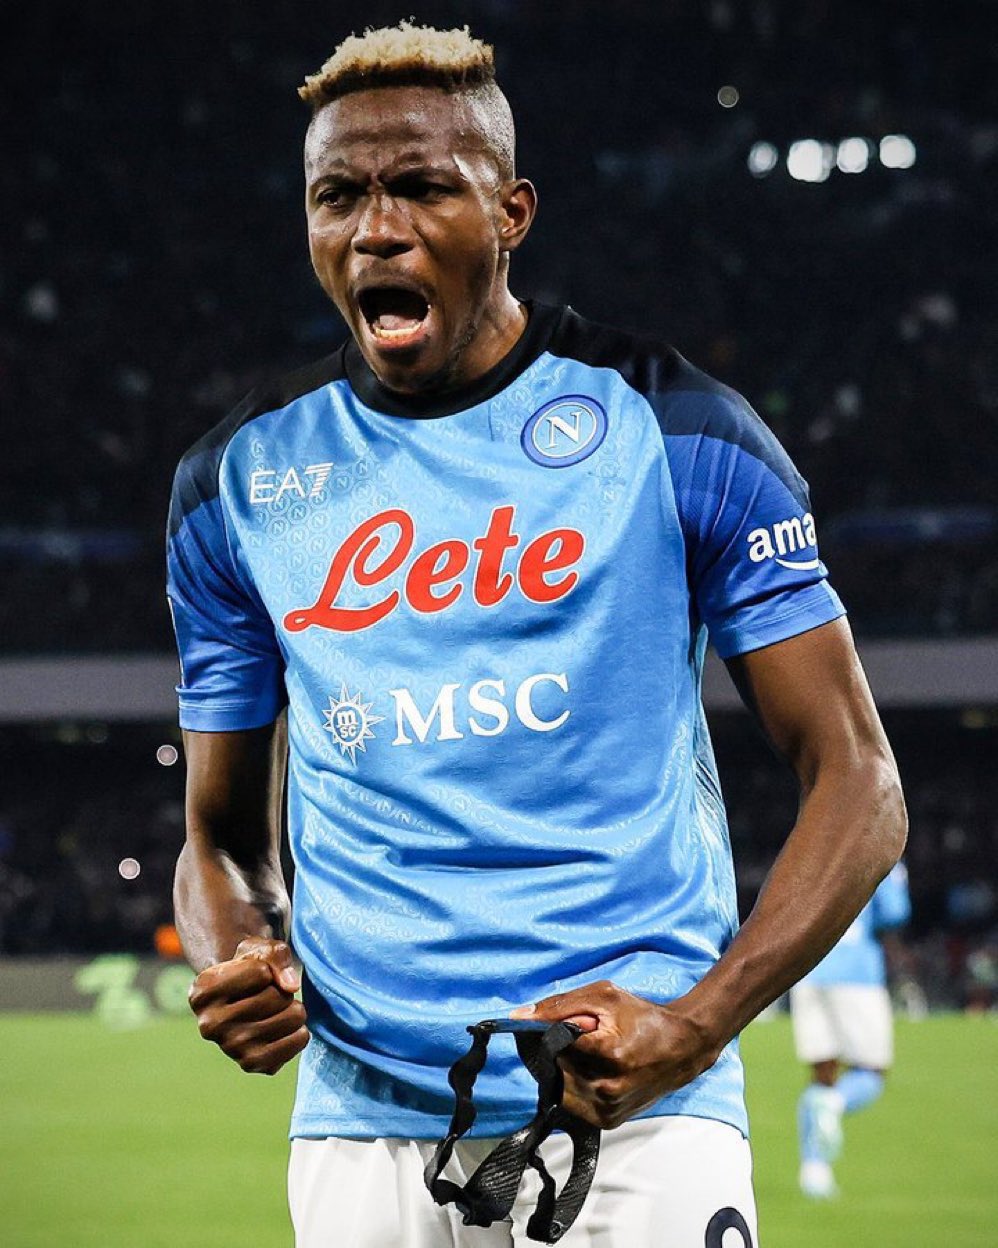 OSIMHEN THE HERO AS NAPOLI CLINCH SERIA A TITLE AFTER 33 YEARS